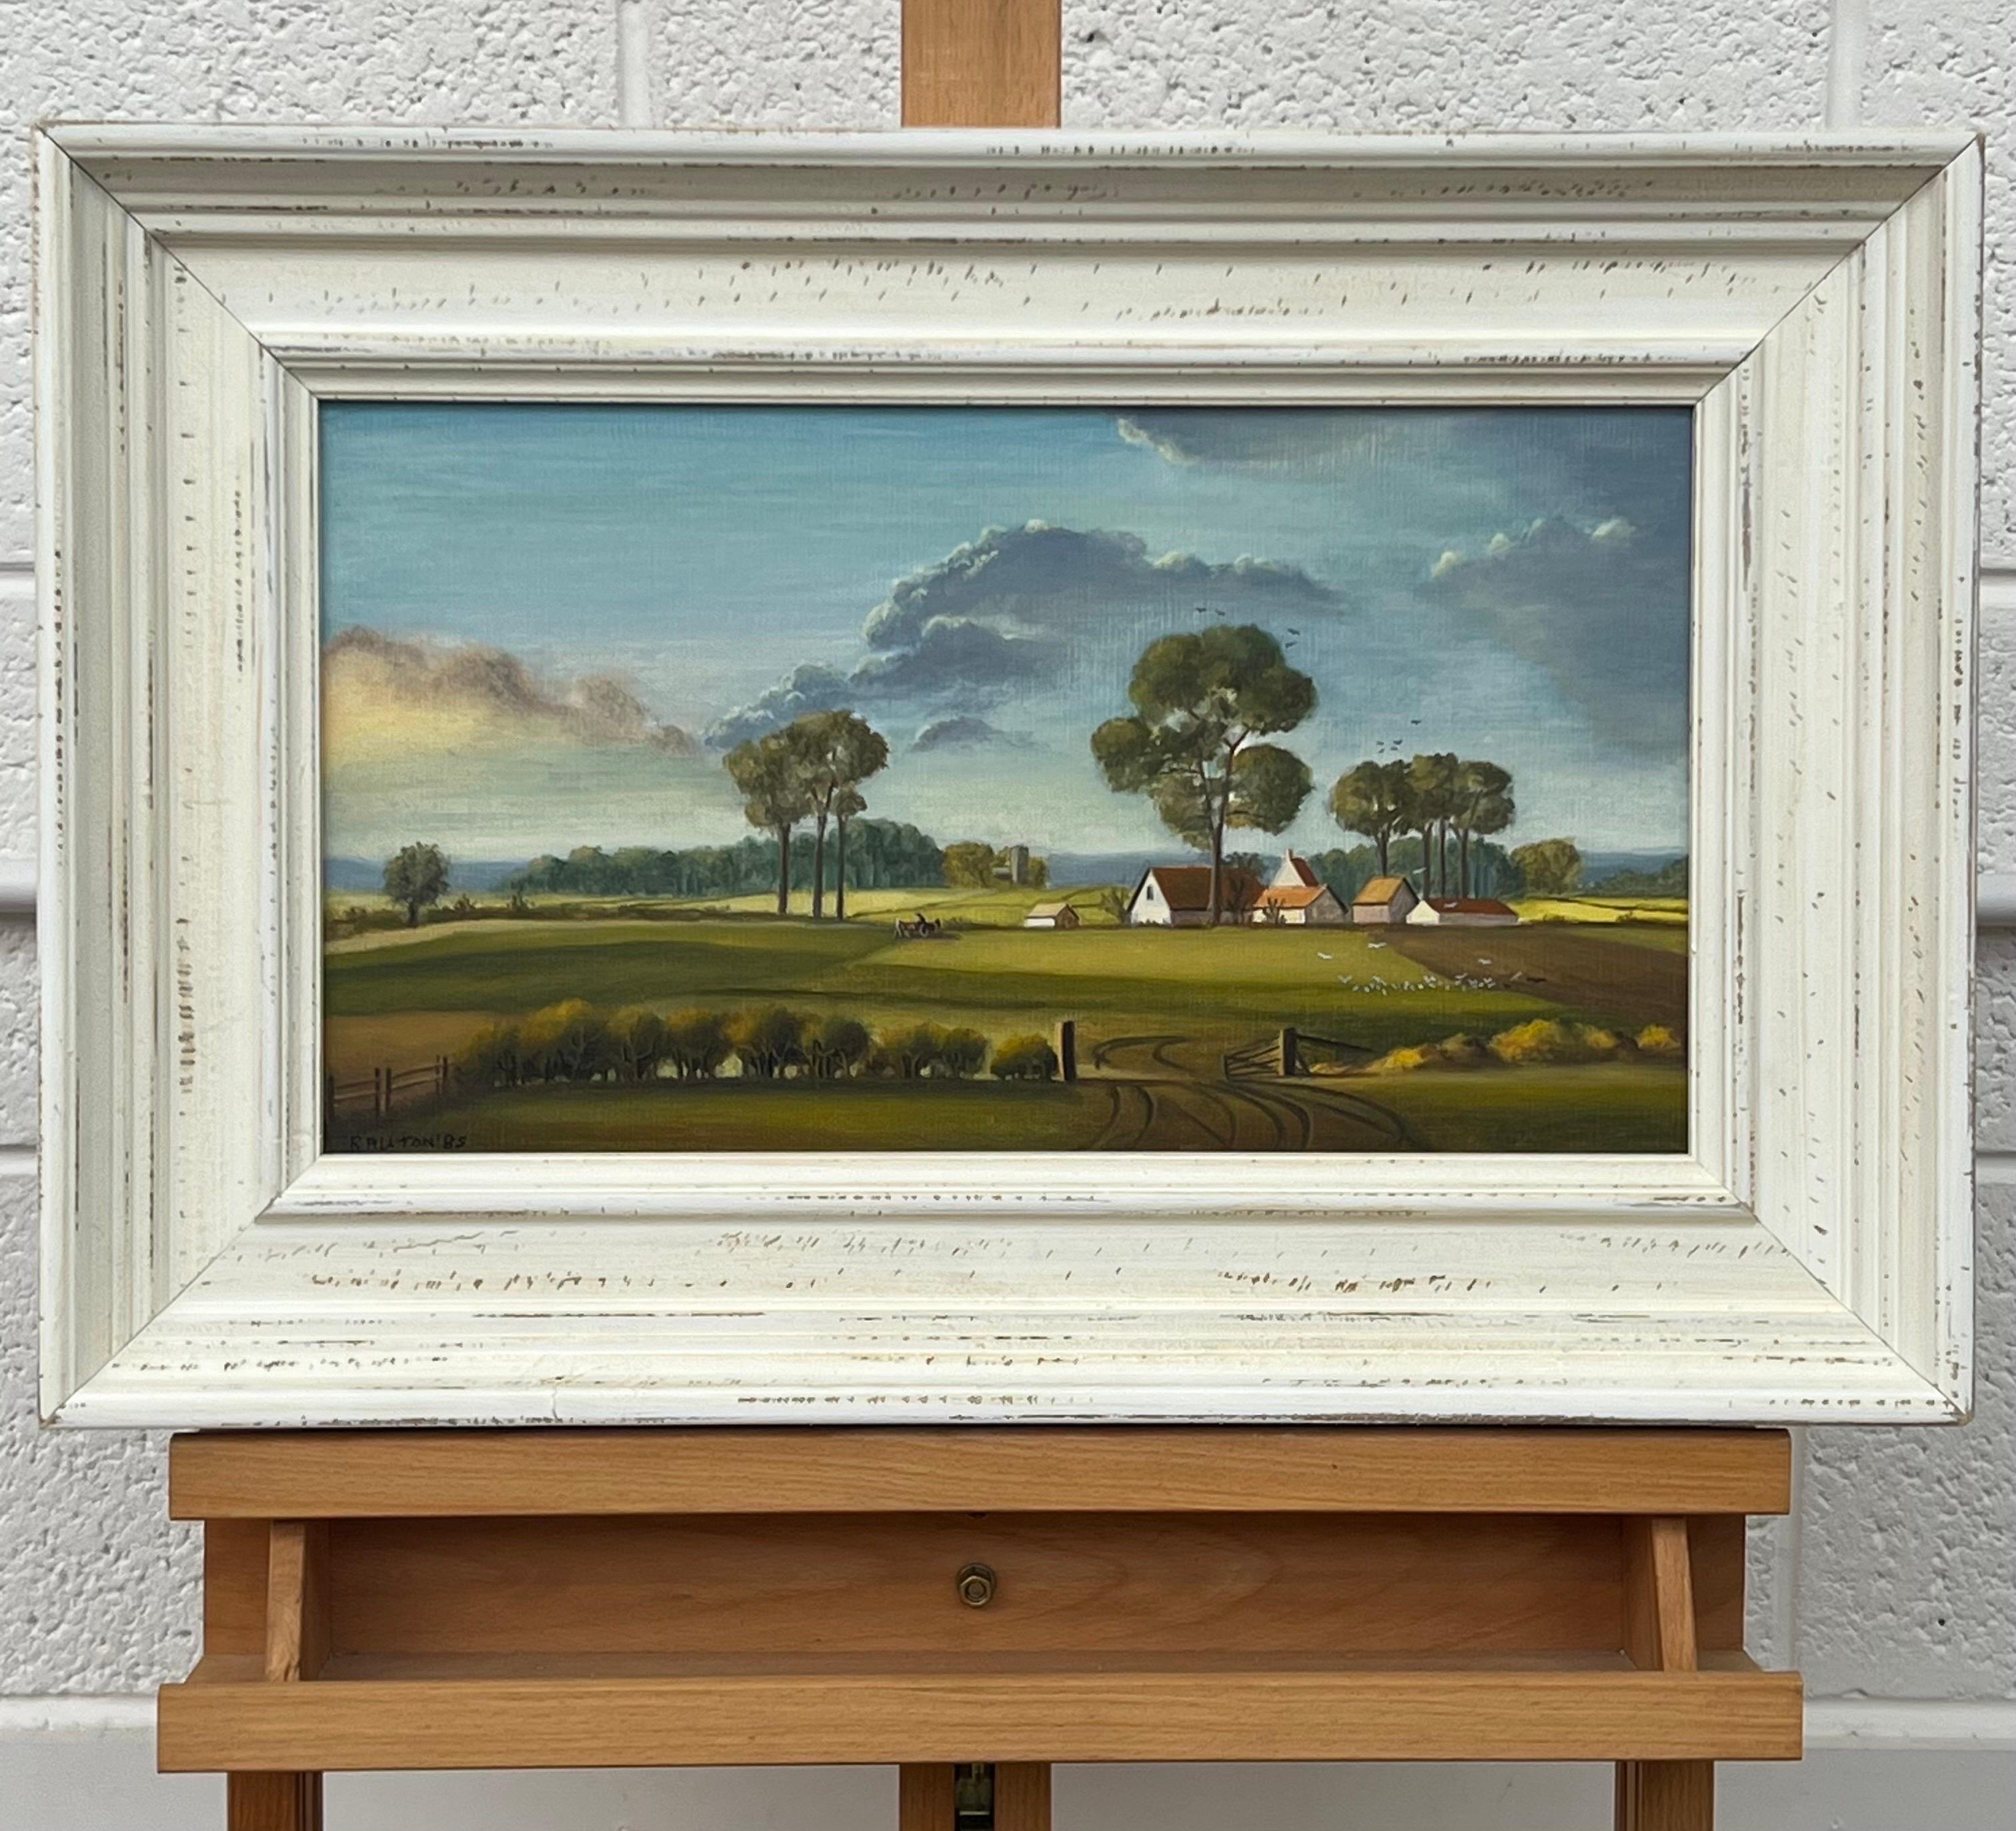 Farm Landscape with Lush Green Fields & Summer Sky in the English Countryside 

Art measures 16.75 x 9.5 inches 
Frame measures 22 x 15 inches 

